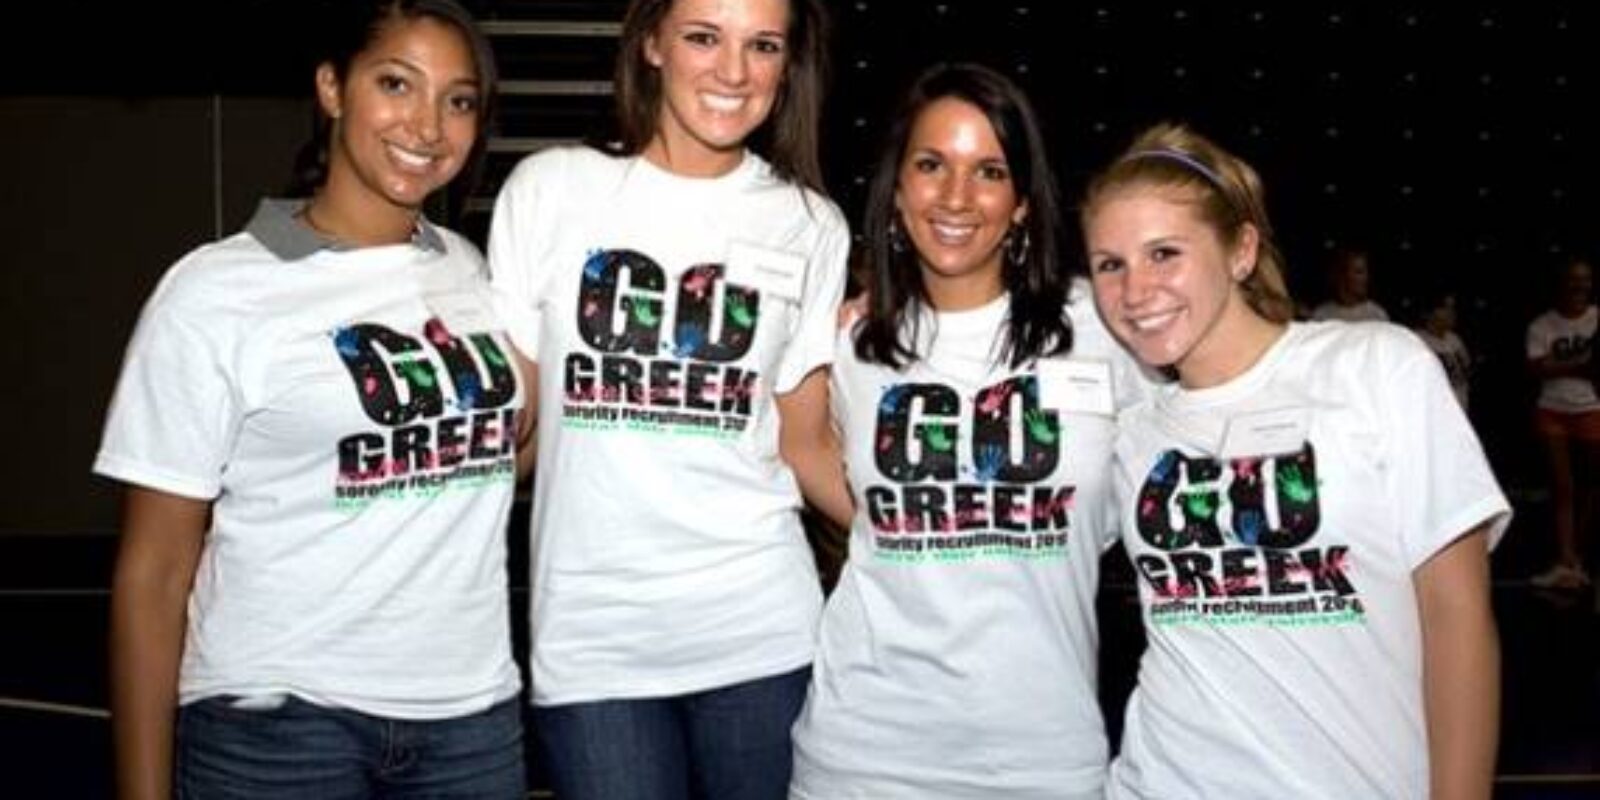 Greek Apparel – A Symbol of Fraternity and Sorority